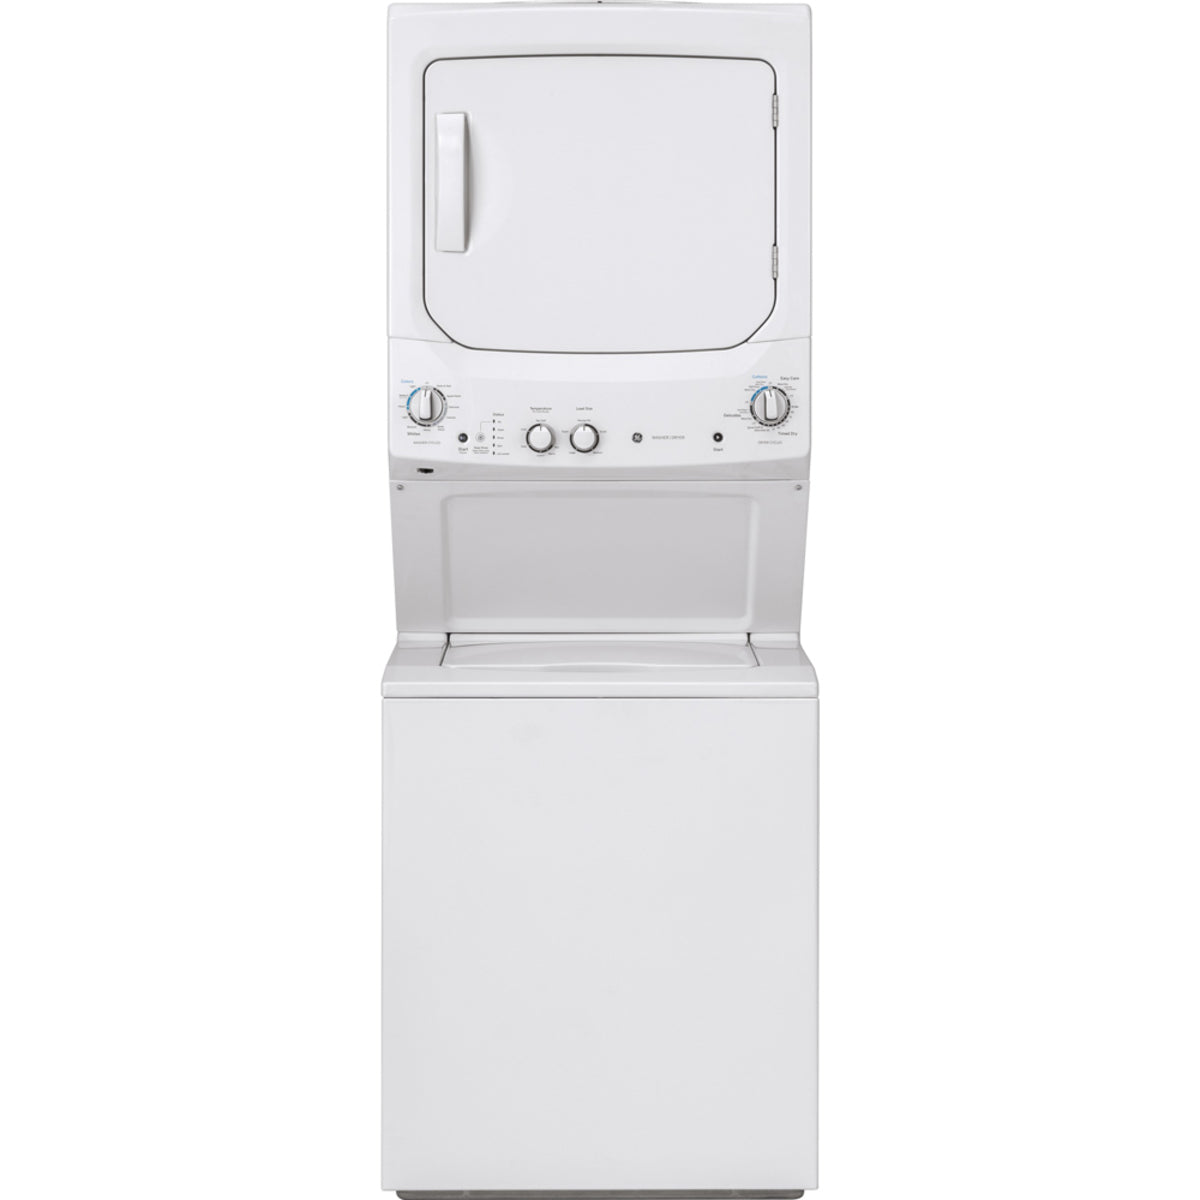 GE - 2.6 cu. ft. Washer and 4.4 cu. ft. Electric Dryer Unitized Laundry Centre in White - GUD24ESMMWW